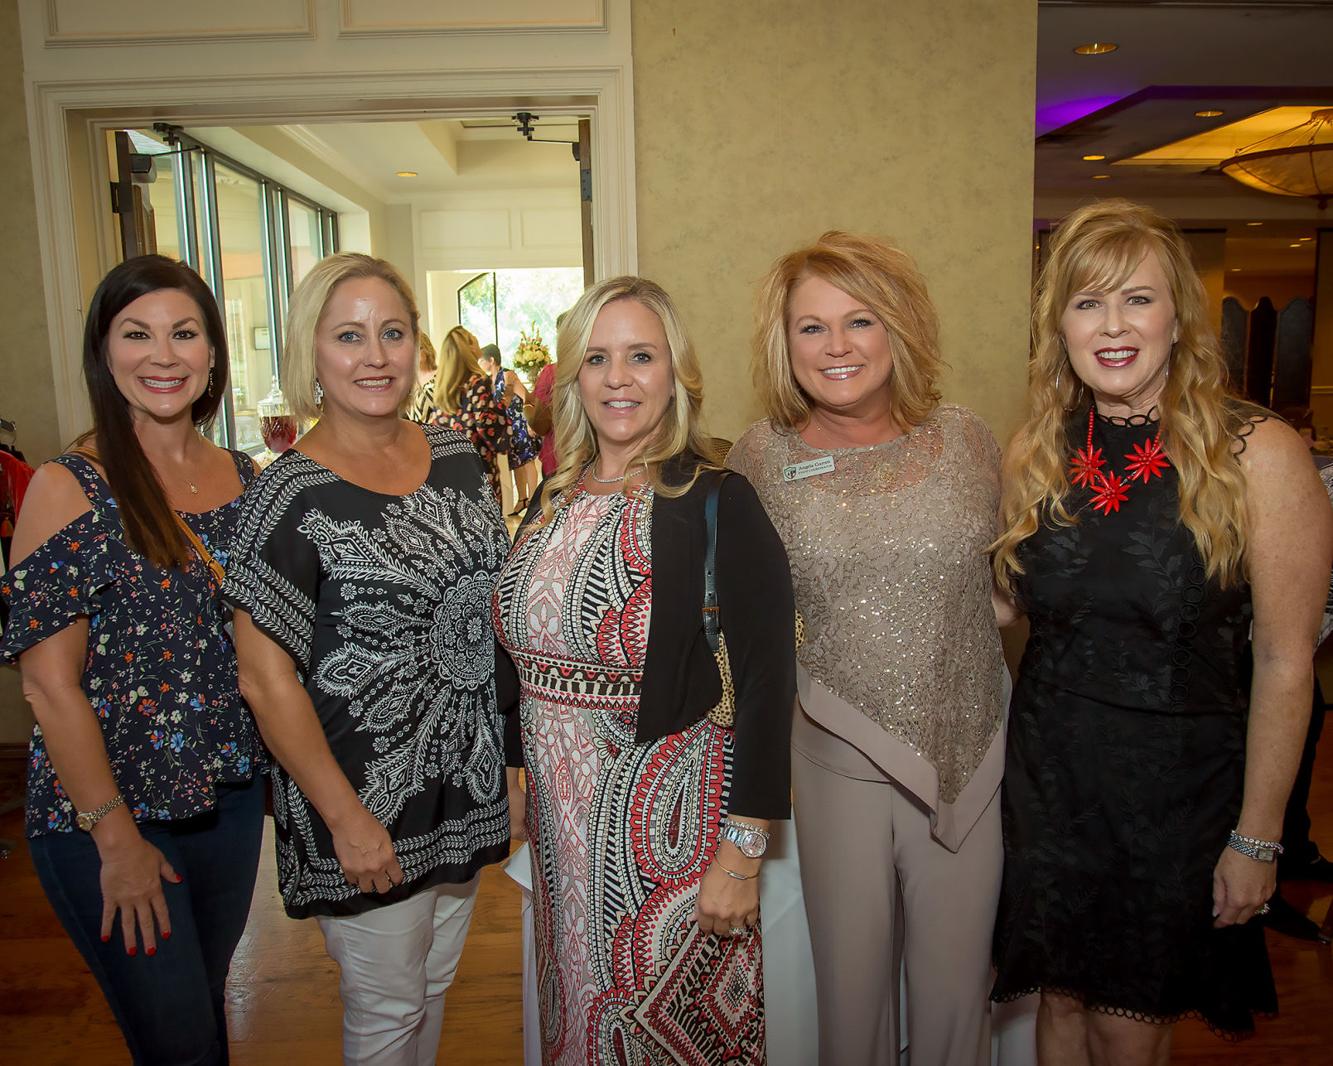 PictureThis! Ladies Luncheon & Fashion Show | Charm/View | news-journal.com